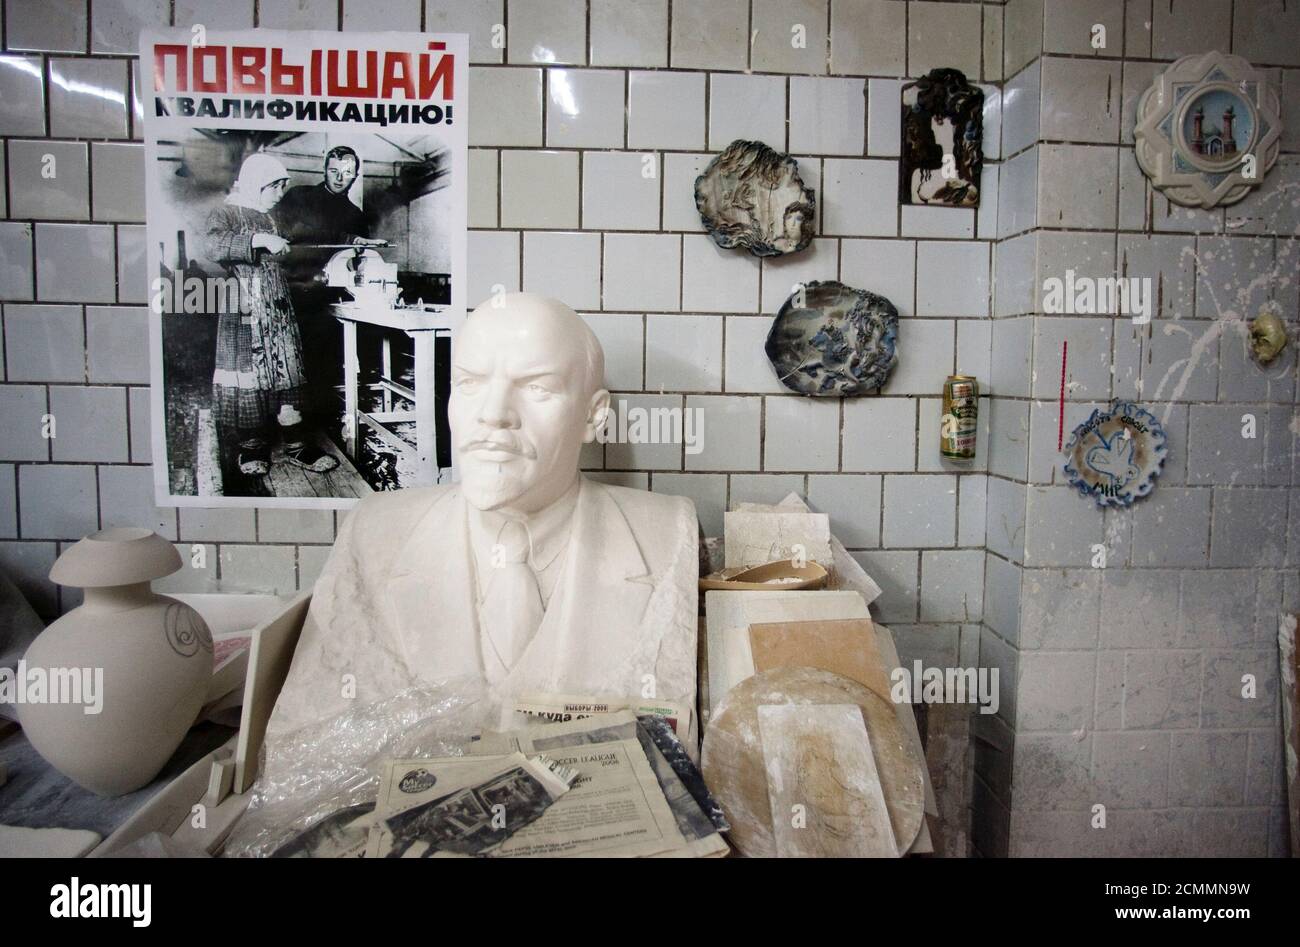 A bust of Soviet state founder Vladimir Lenin stands in a workshop of the Dulevo Porcelain factory in the town of Dulevo, about 115 km (73 miles) from Moscow February 20, 2009. A Tsarist-era porcelain factory that survived the Russian revolution and the end of the Soviet Union is on the verge of collapse, its plight typical of hundreds of outmoded industrial plants across this vast country. Founded in 1832, the Dulevo Porcelain pottery once supplied the Russian court. In the 20th century, it produced special communist revolutionary pieces for the Bolshevik elite and their allies overseas. The  Stock Photo